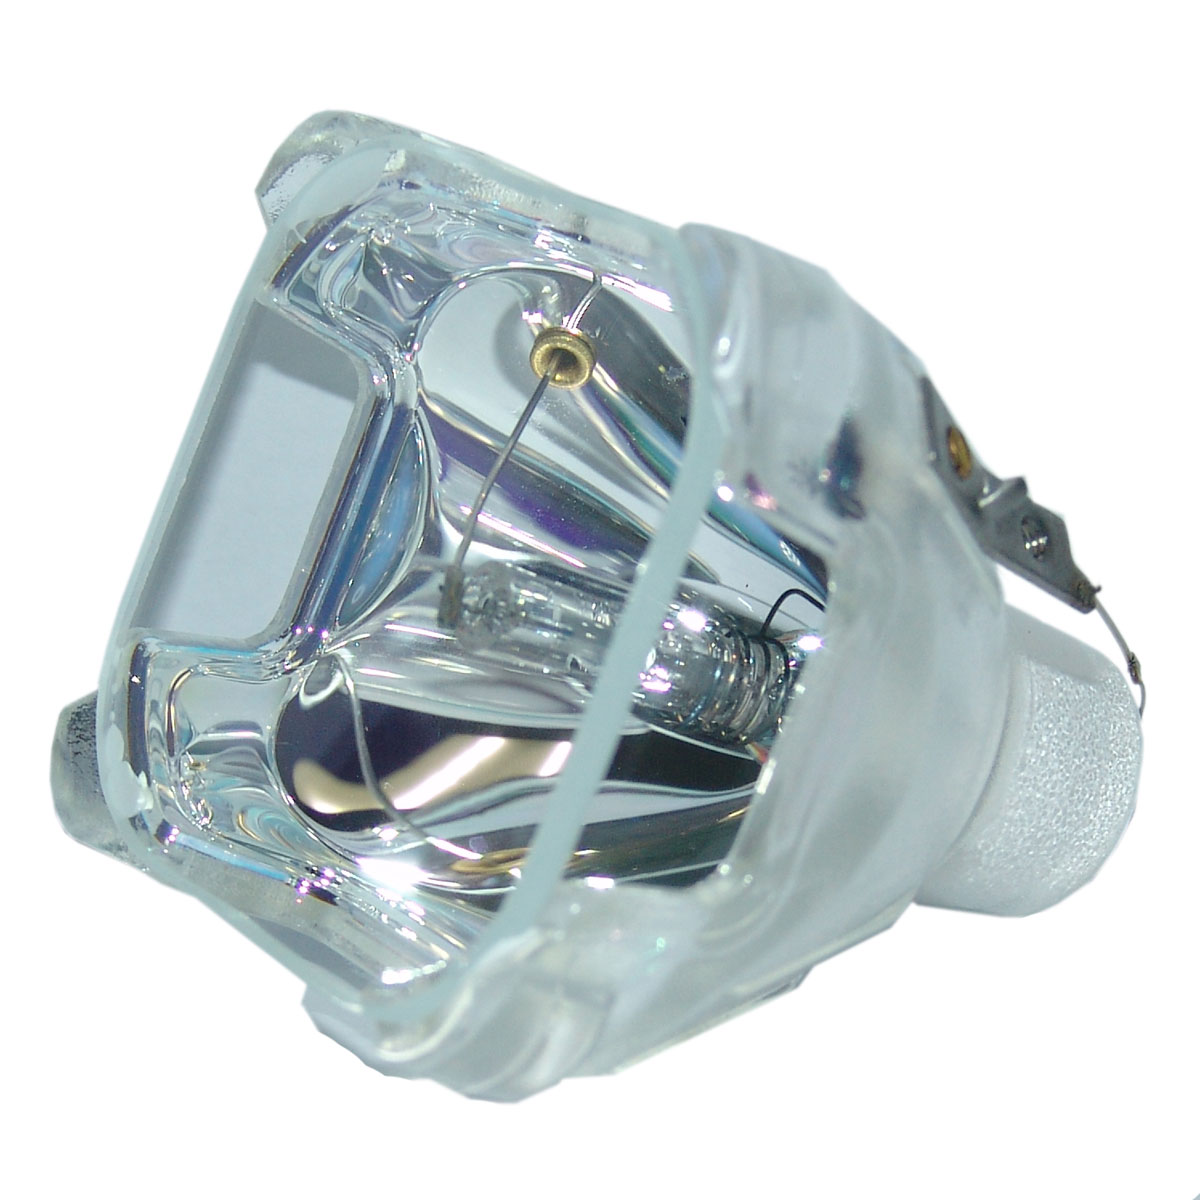 Lutema Economy Bulb for Eiki 610-300-7267 Projector (Lamp Only) - image 1 of 6